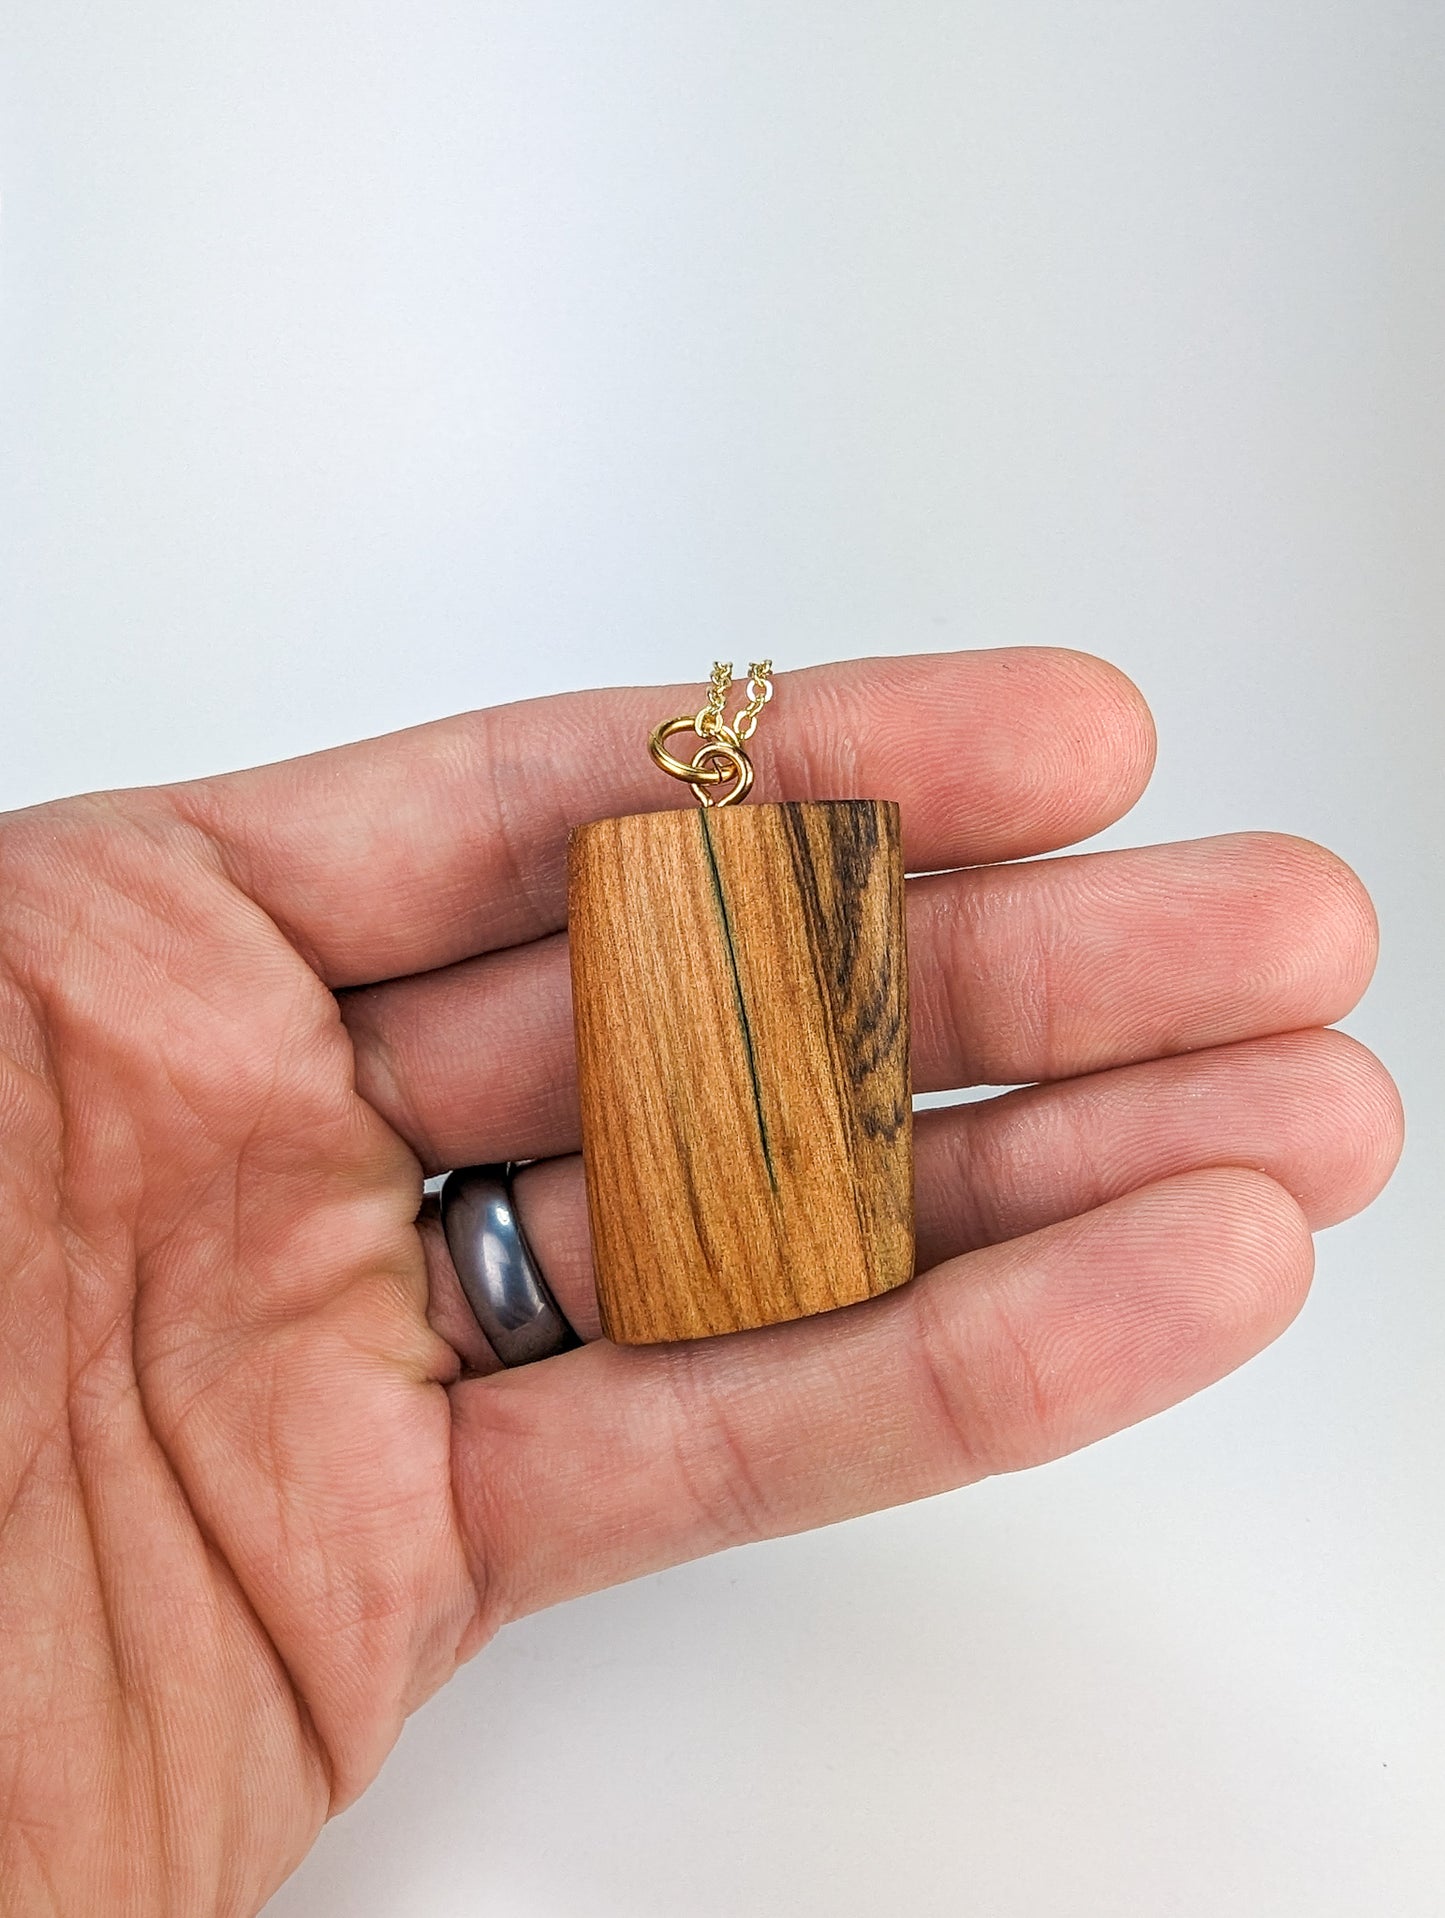 Naturally Fungus-Stained Wooden Pendant w/Black Spalting